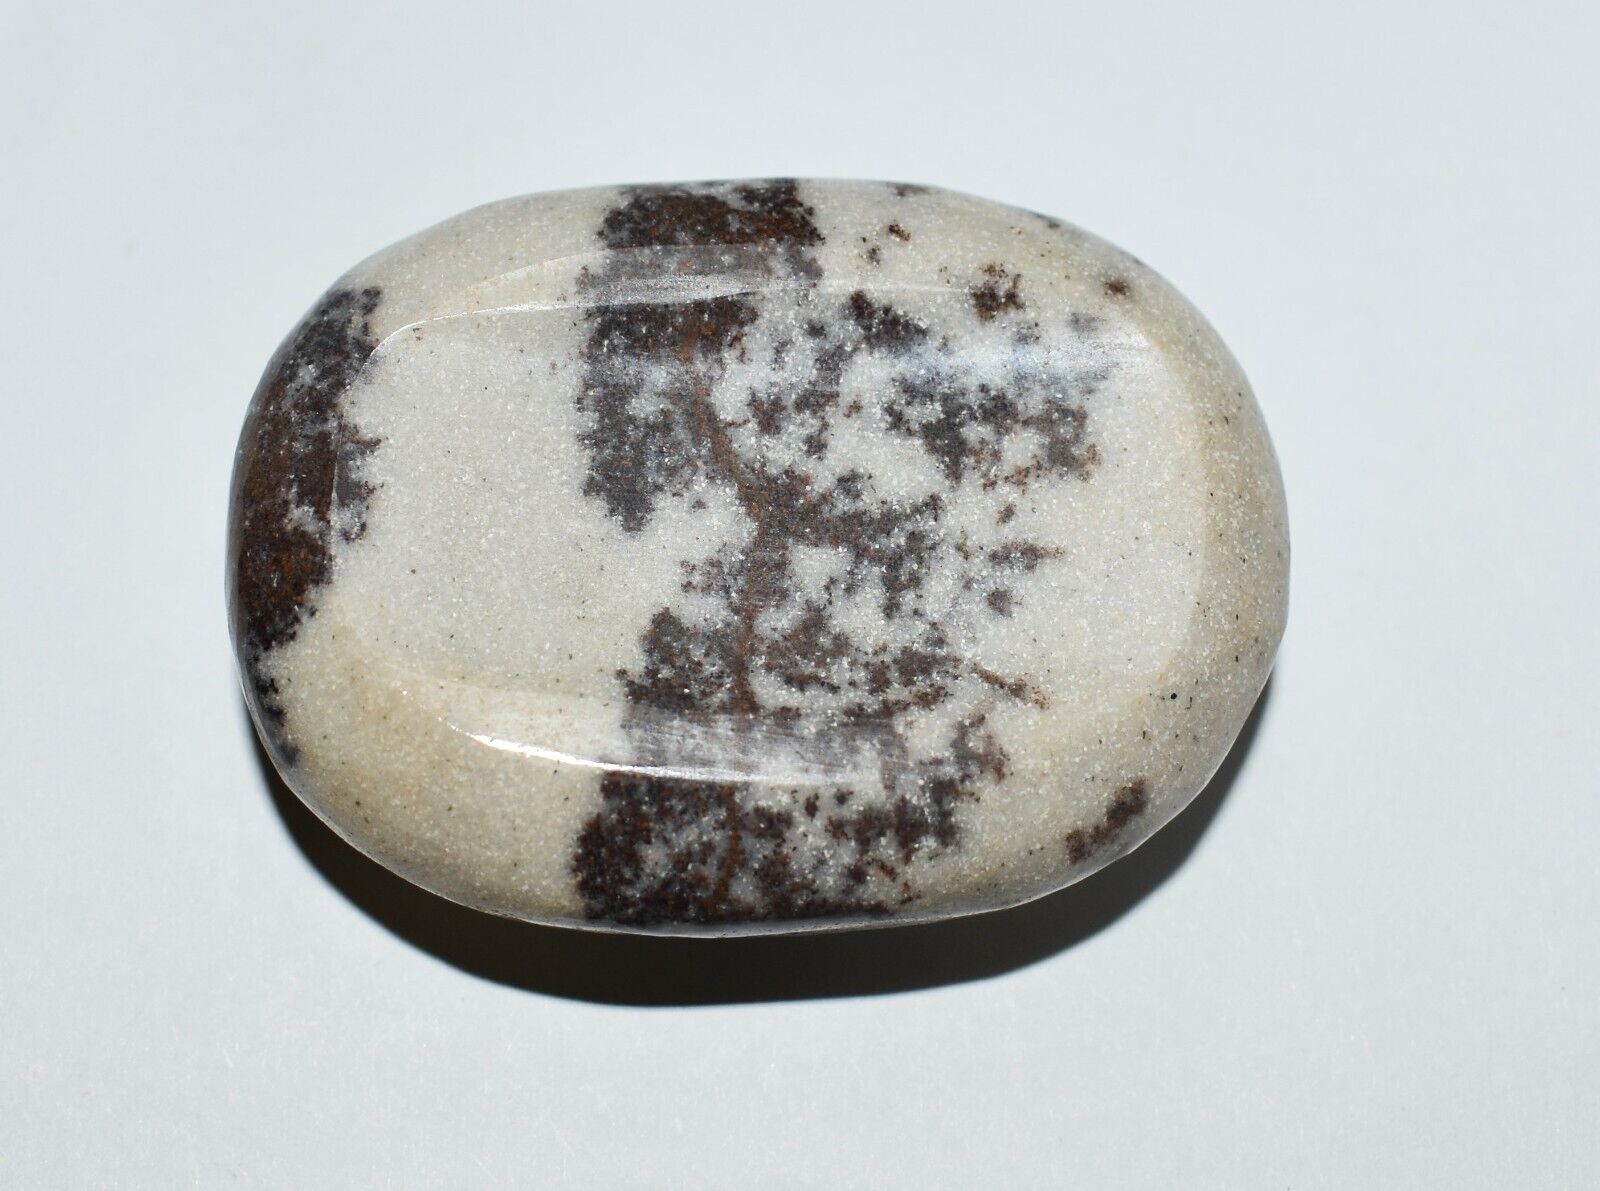 Dendritic Crystal Palm Worry Stone North Carolina New River Fossil Specimen